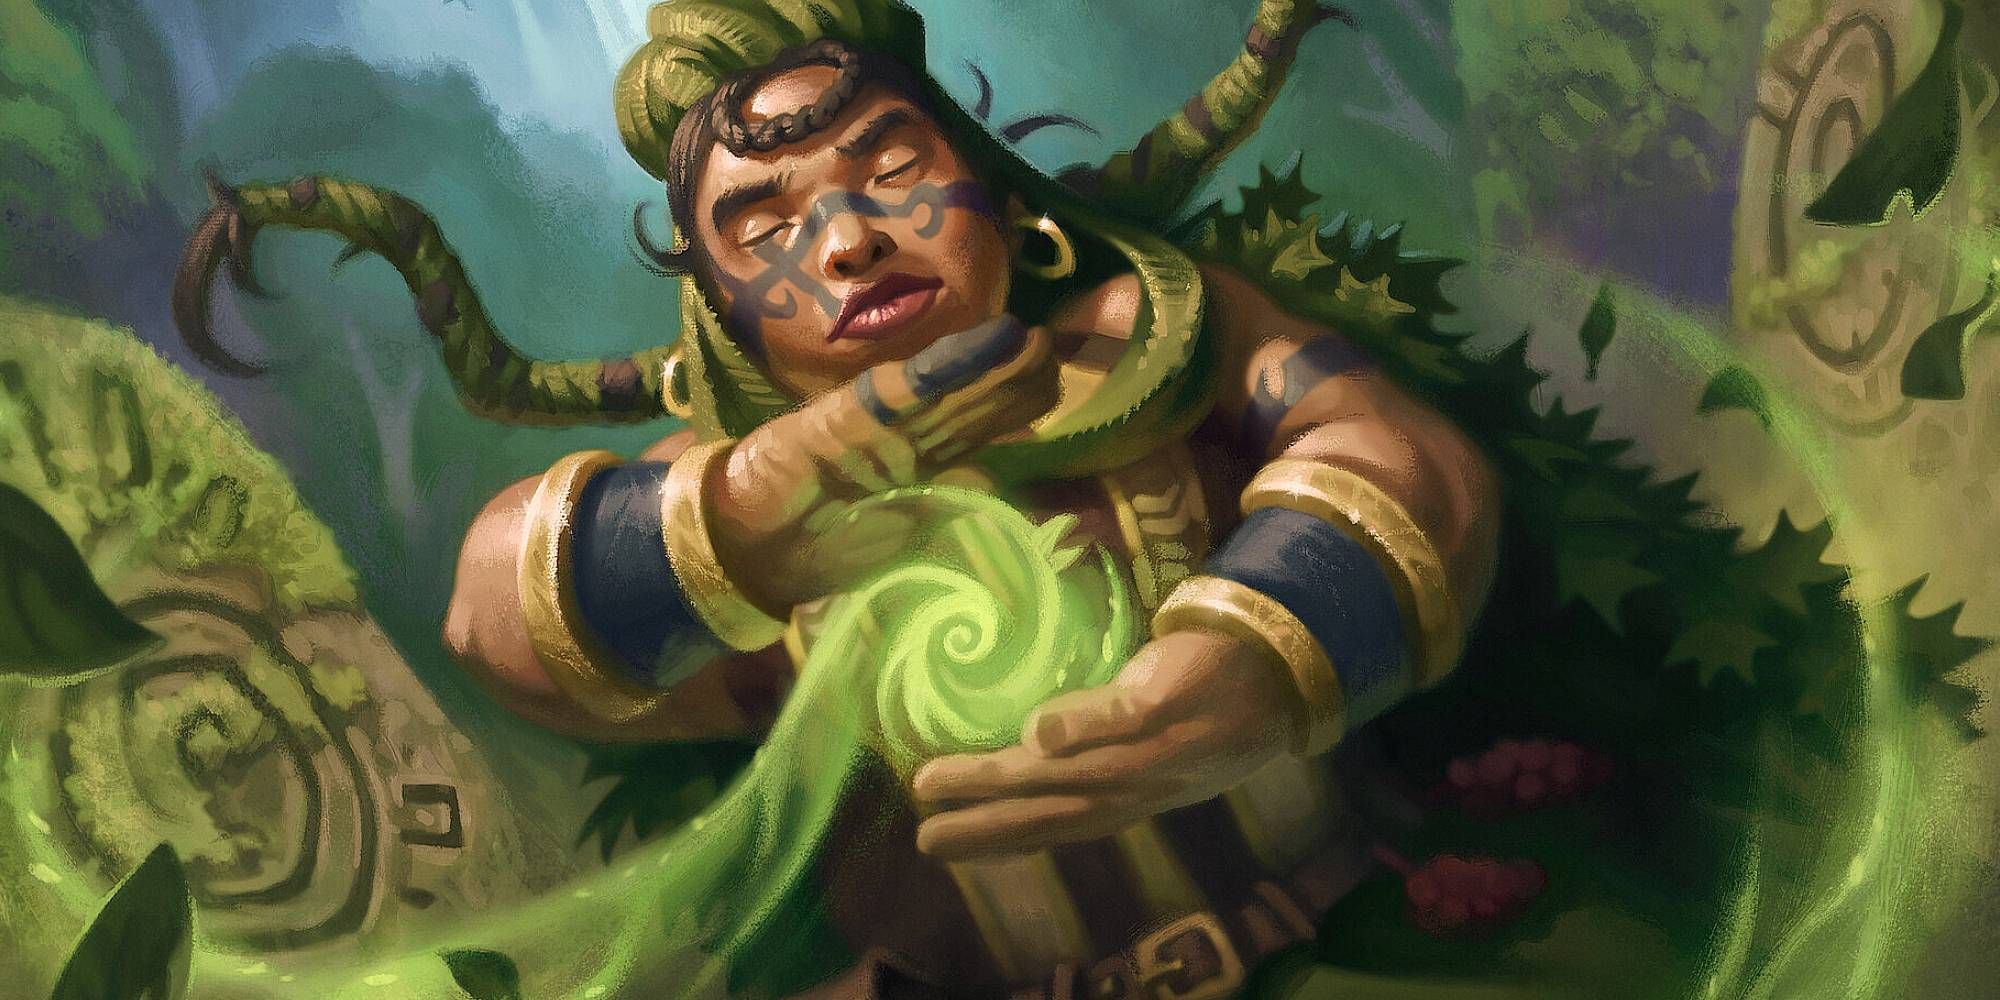 A stout tanned figure sits in a forest as green magic swirls in their hands